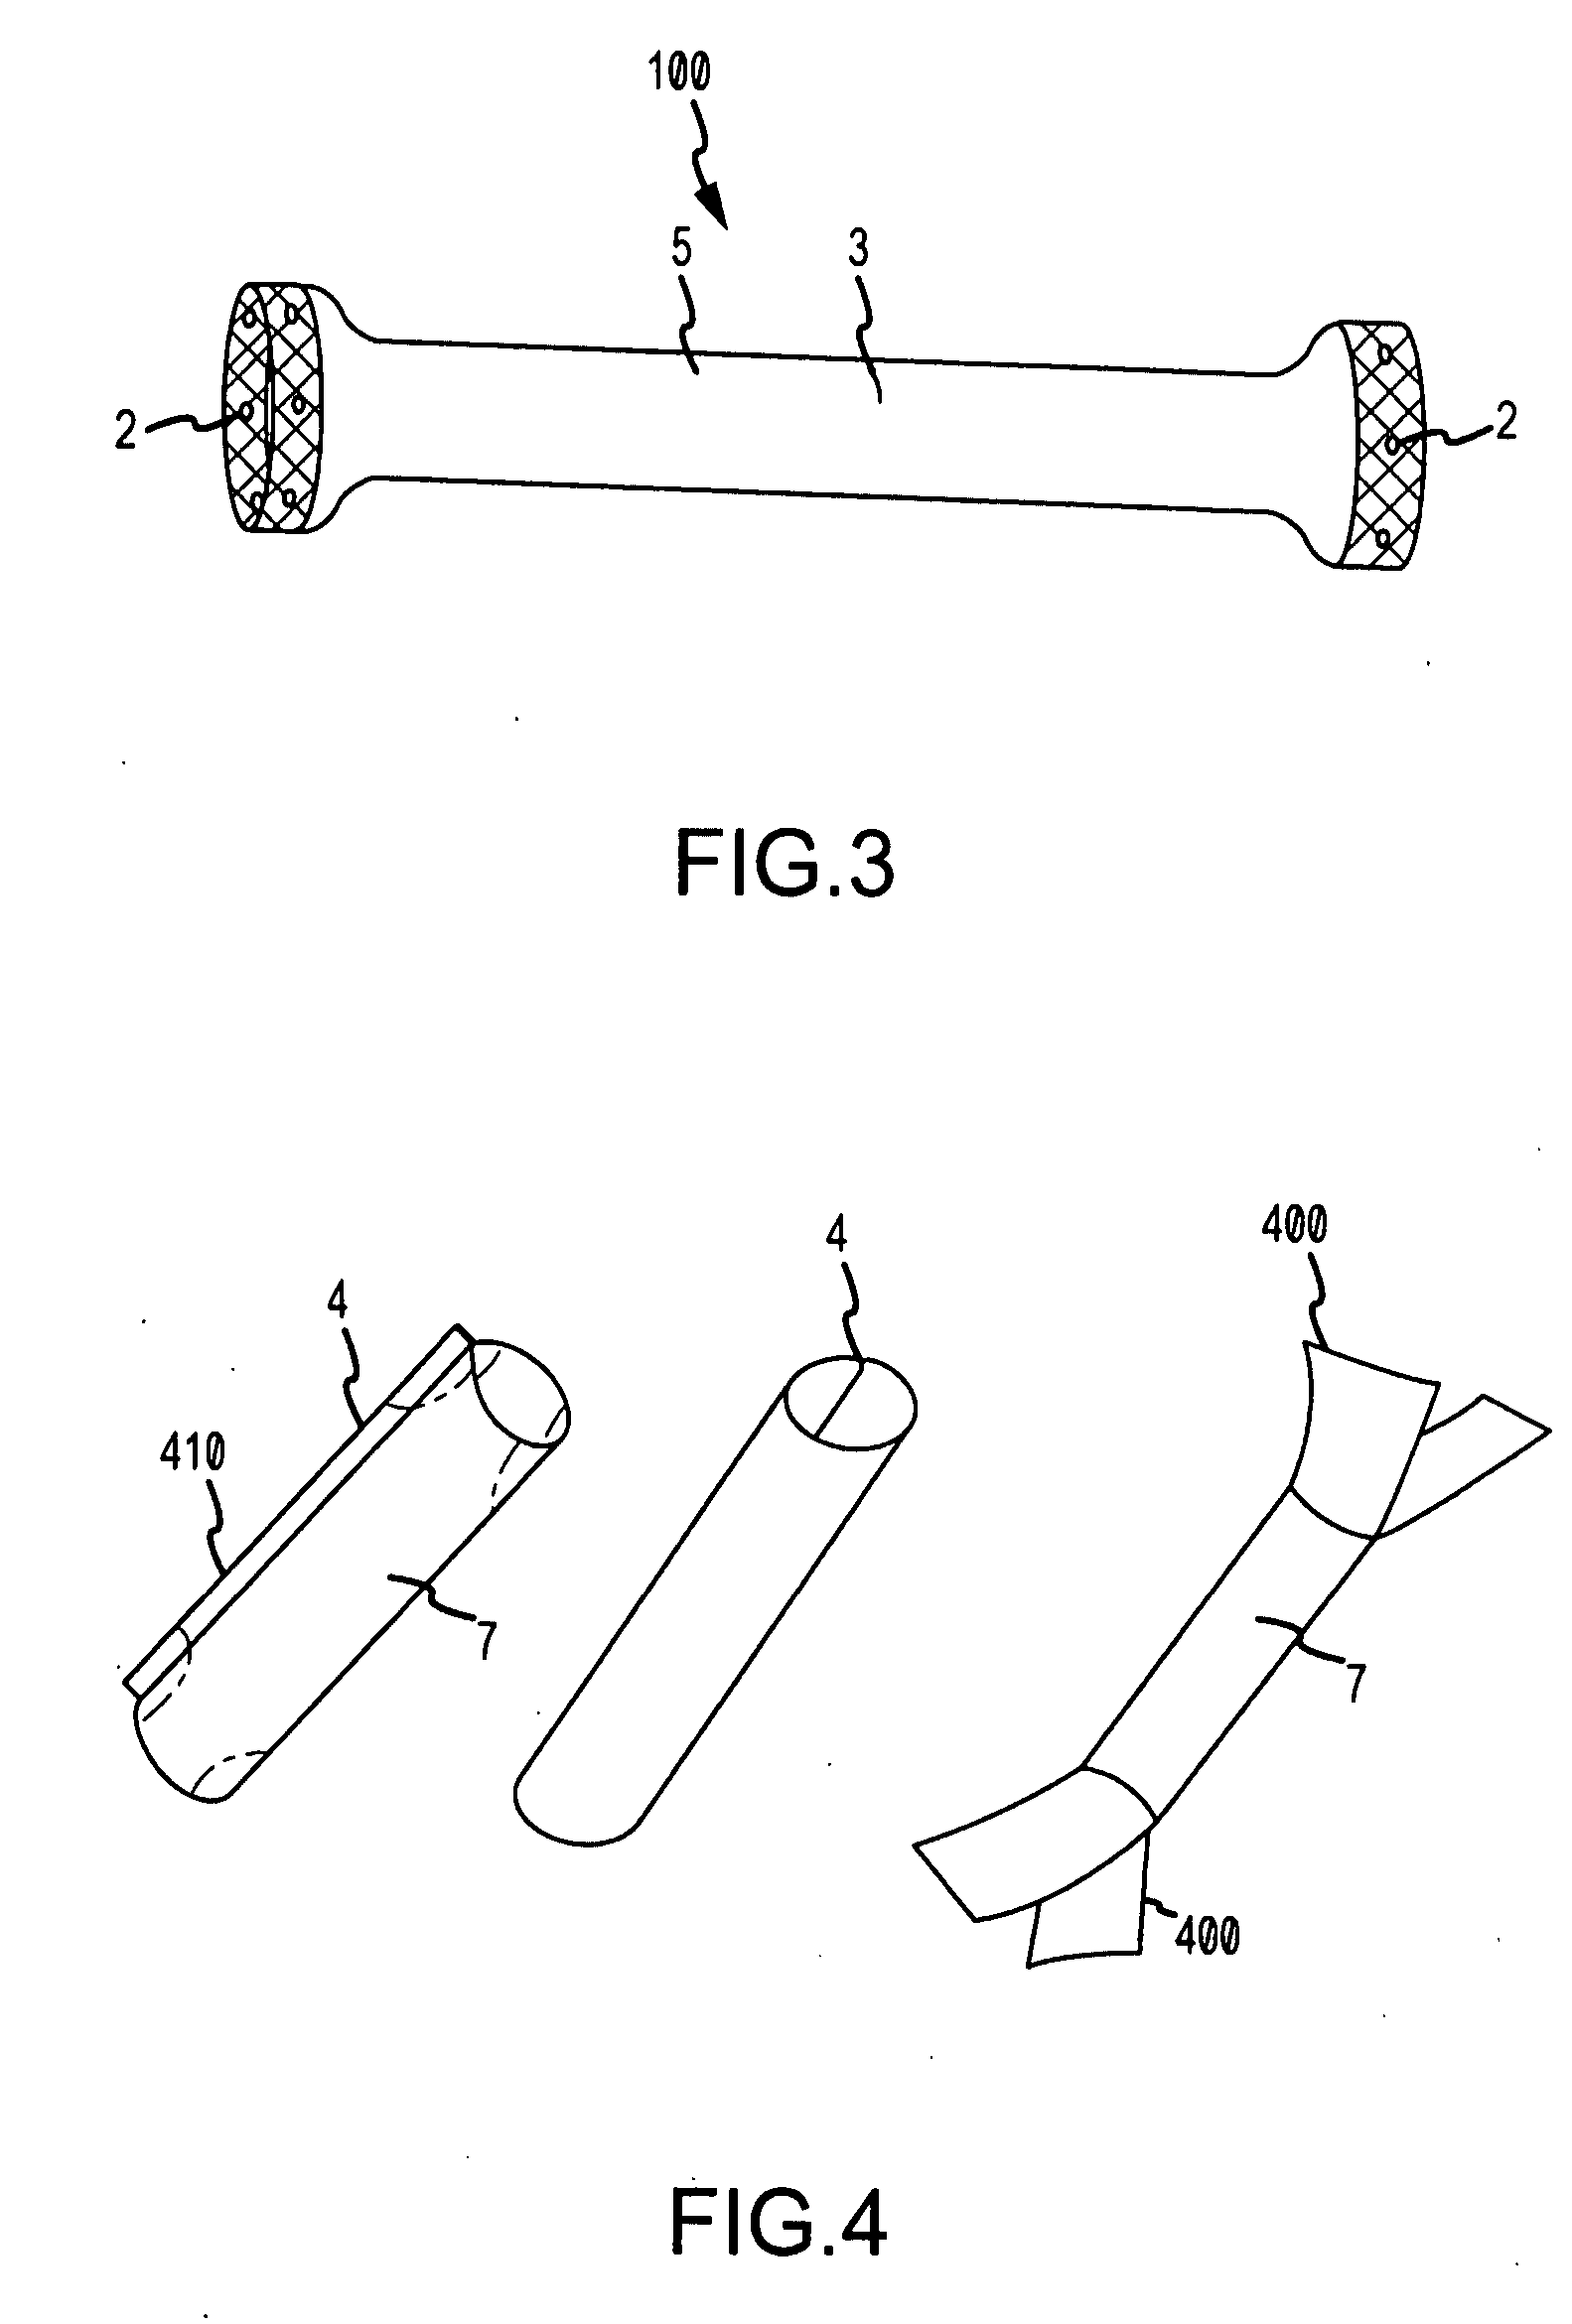 Venous prosthesis and vascular graft with access port